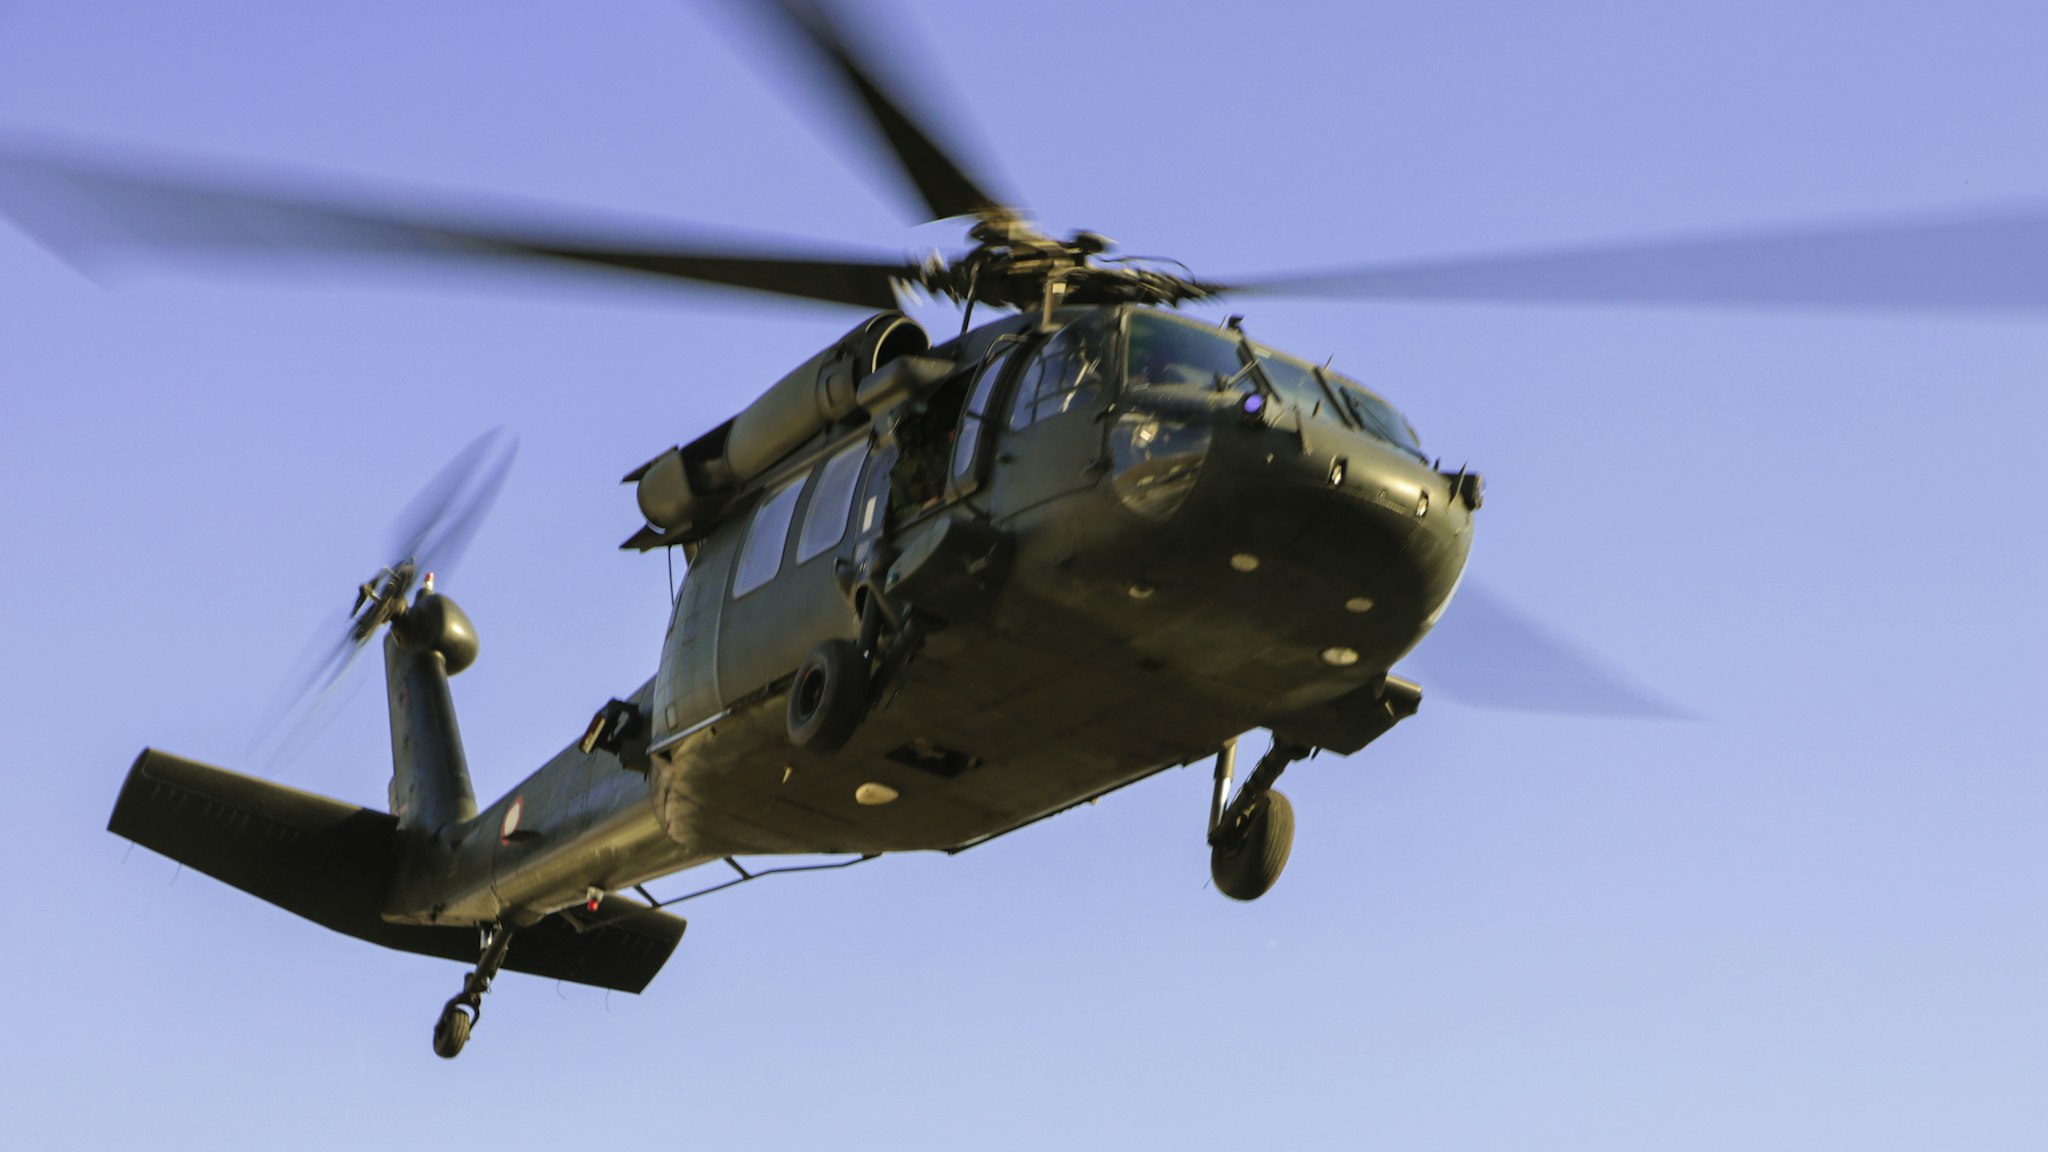 UH-60 Military Utility Helicopter in flight